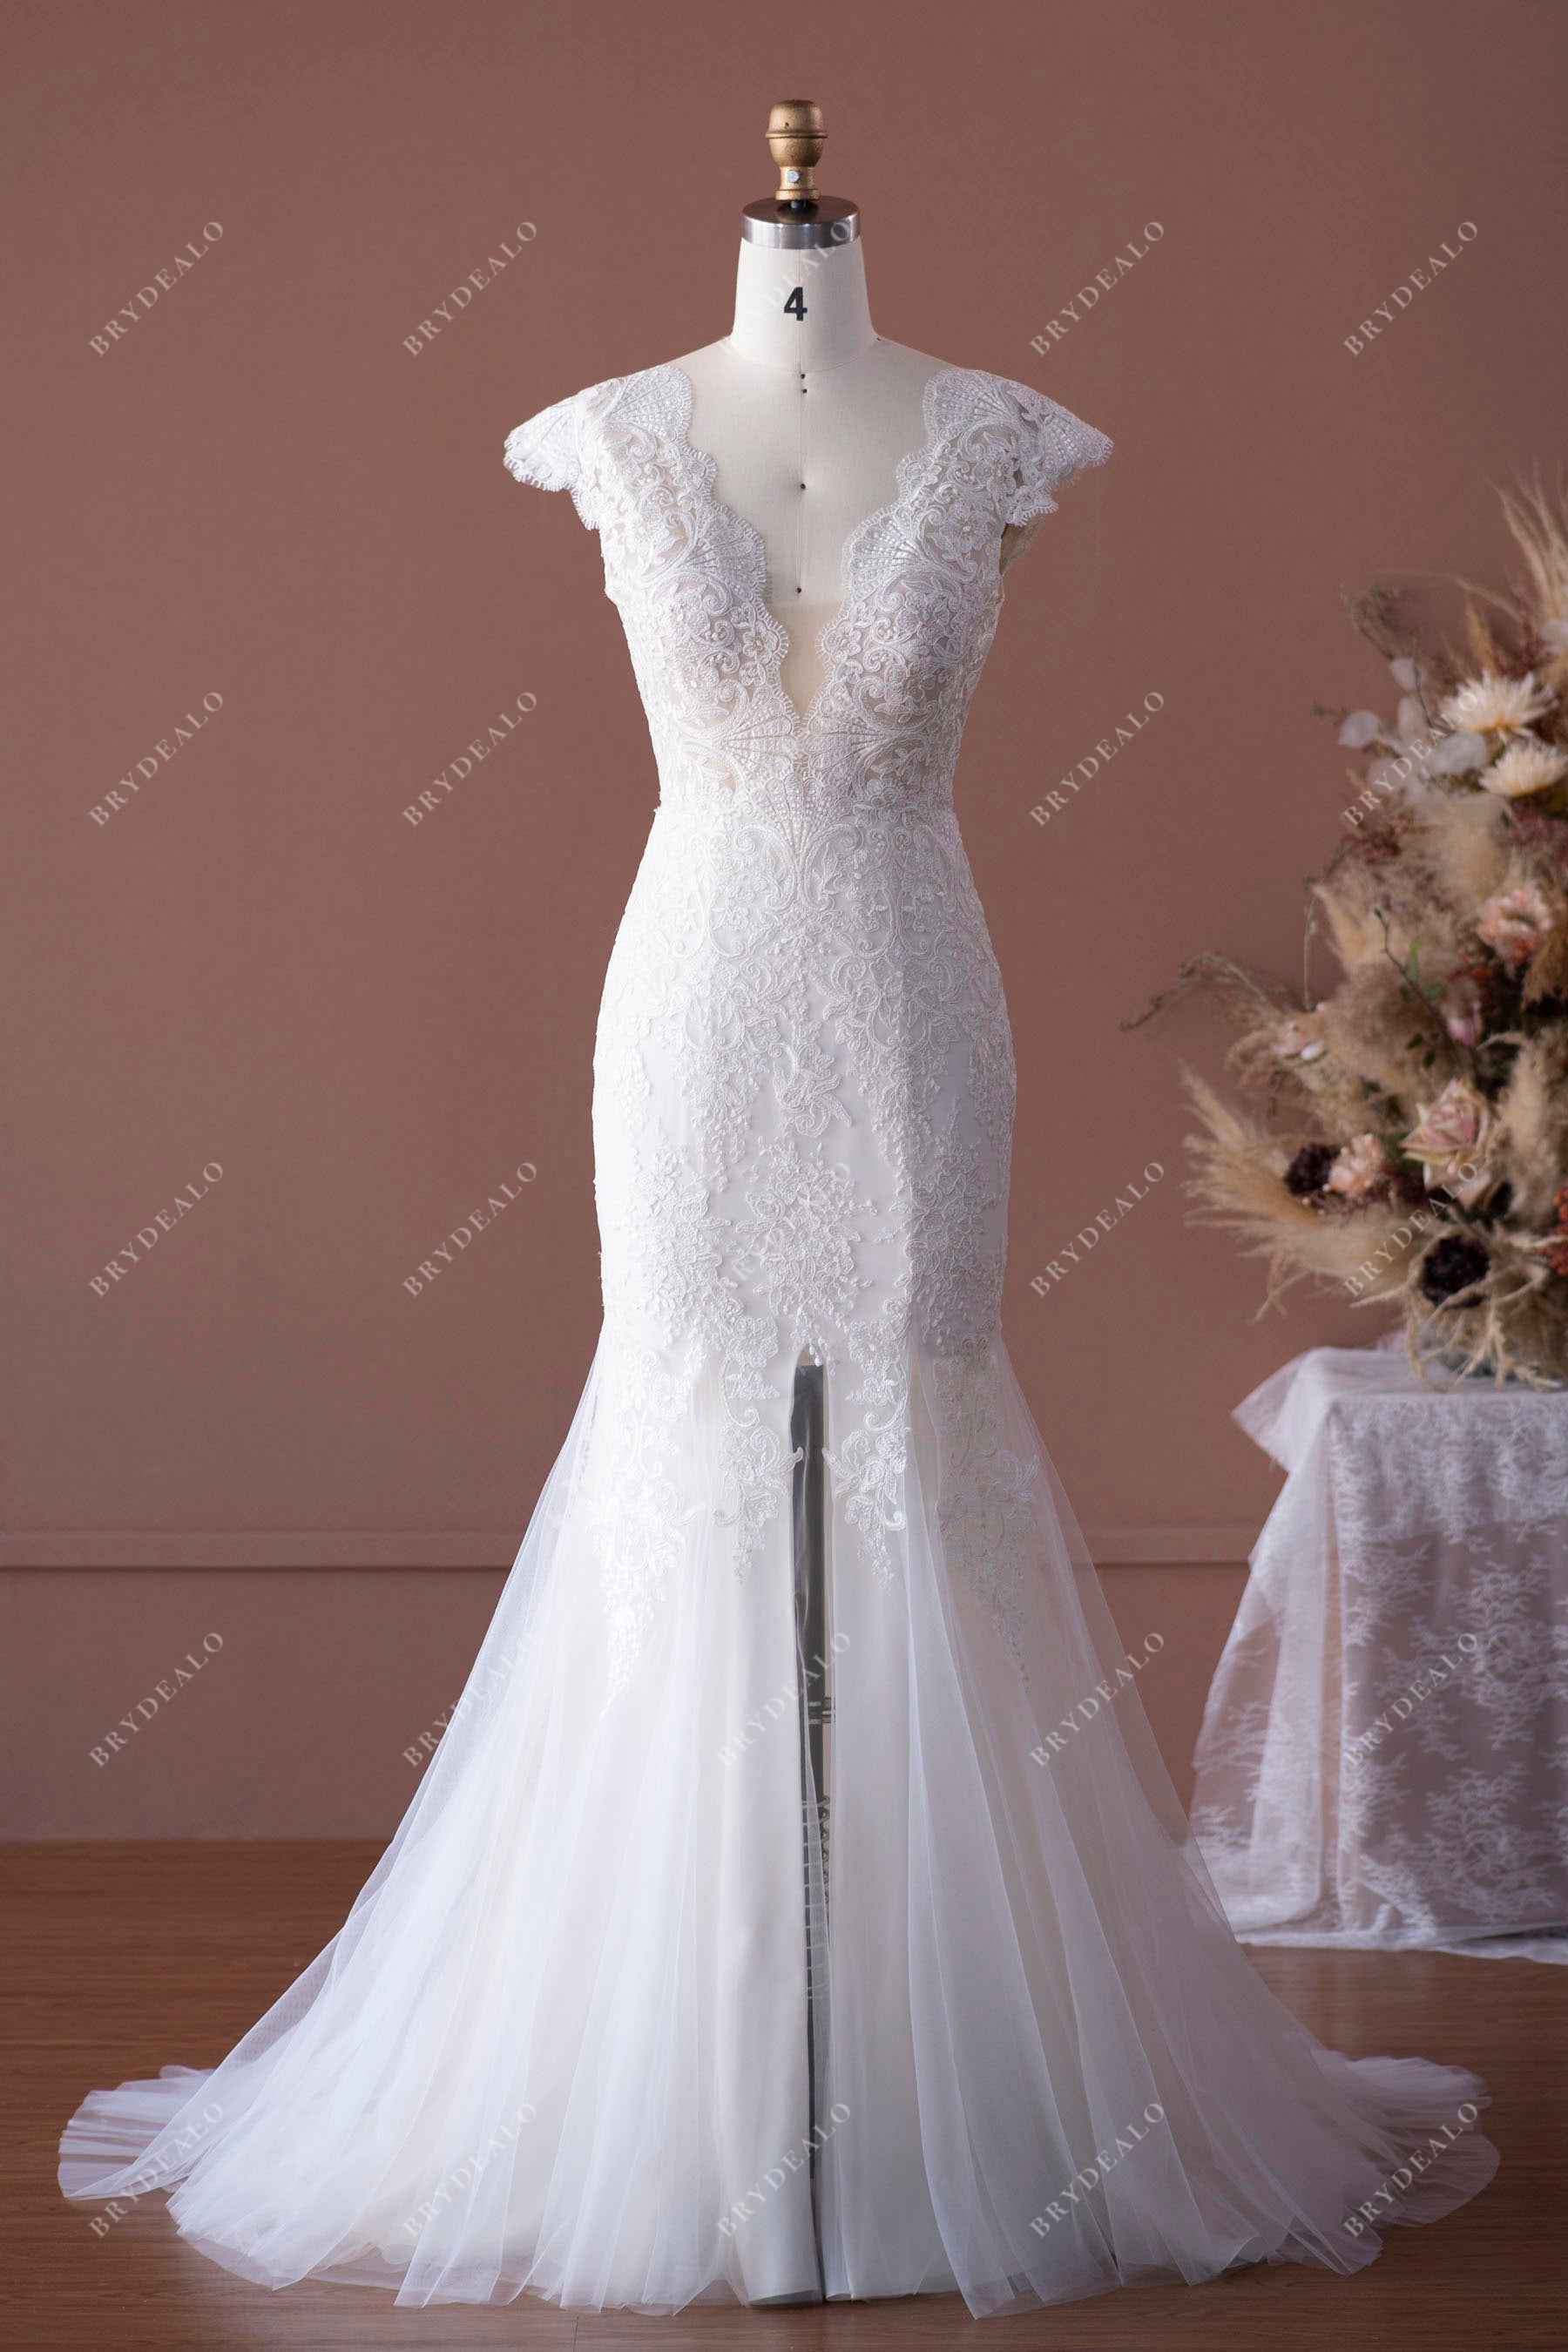 cap sleeves scalloped lace neck fit and flare wedding dress with high slit